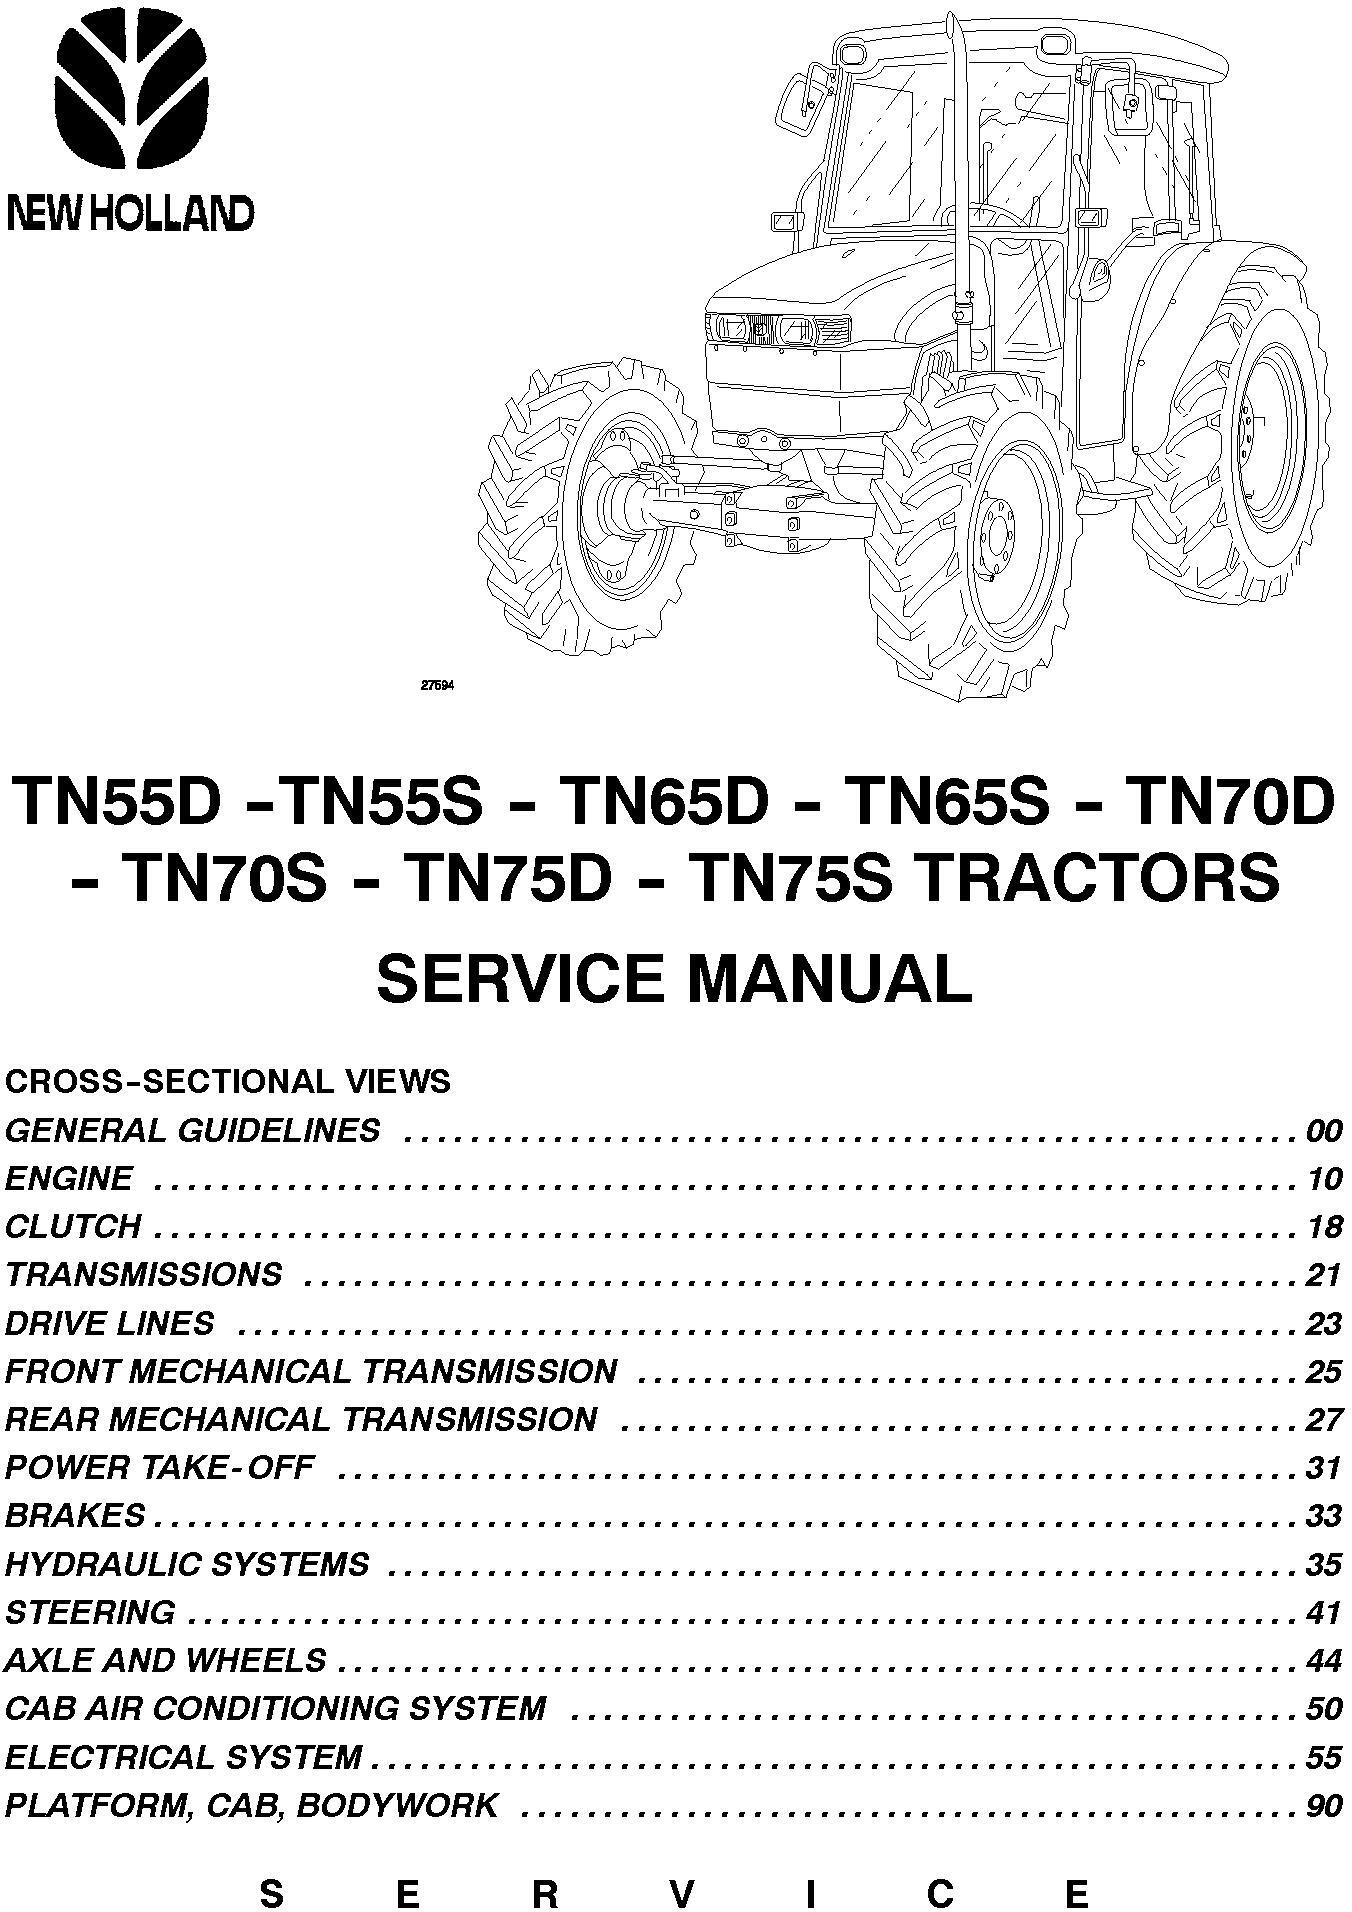 New Holland TN55D, TN55S, TN65D, TN65S, TN70D, TN70S, TN75D, TN75S Tractor Service Manual - 19535